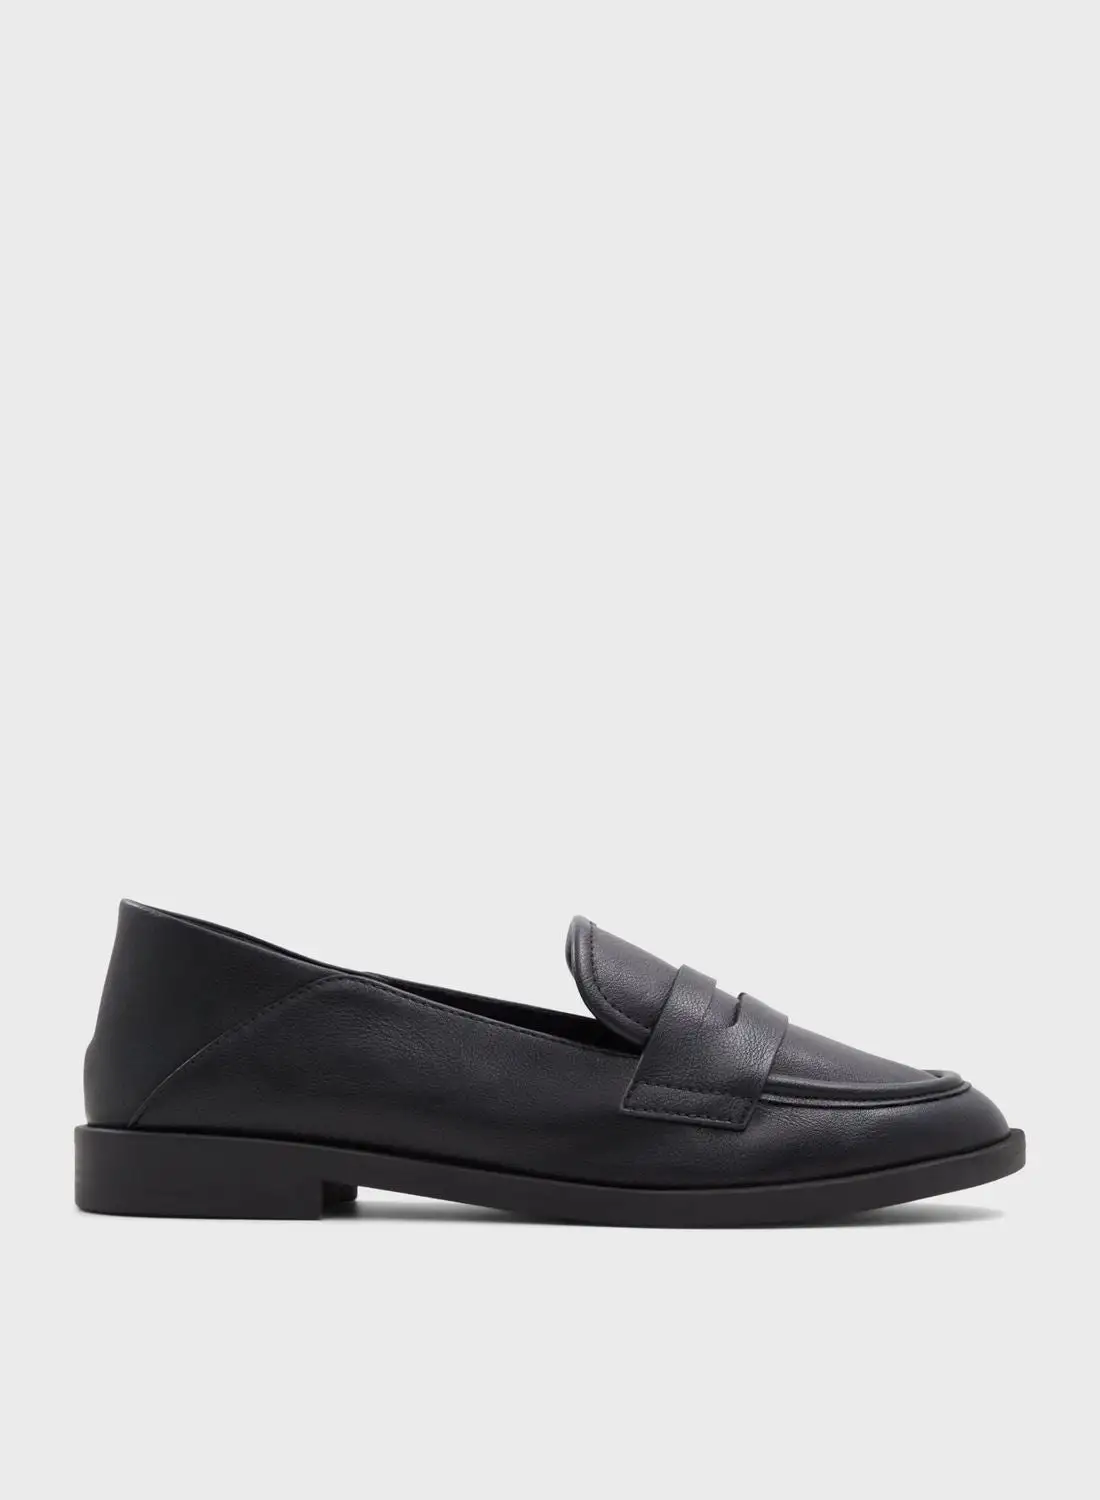 CALL IT SPRING Quiinn Flats Slip On Loafer